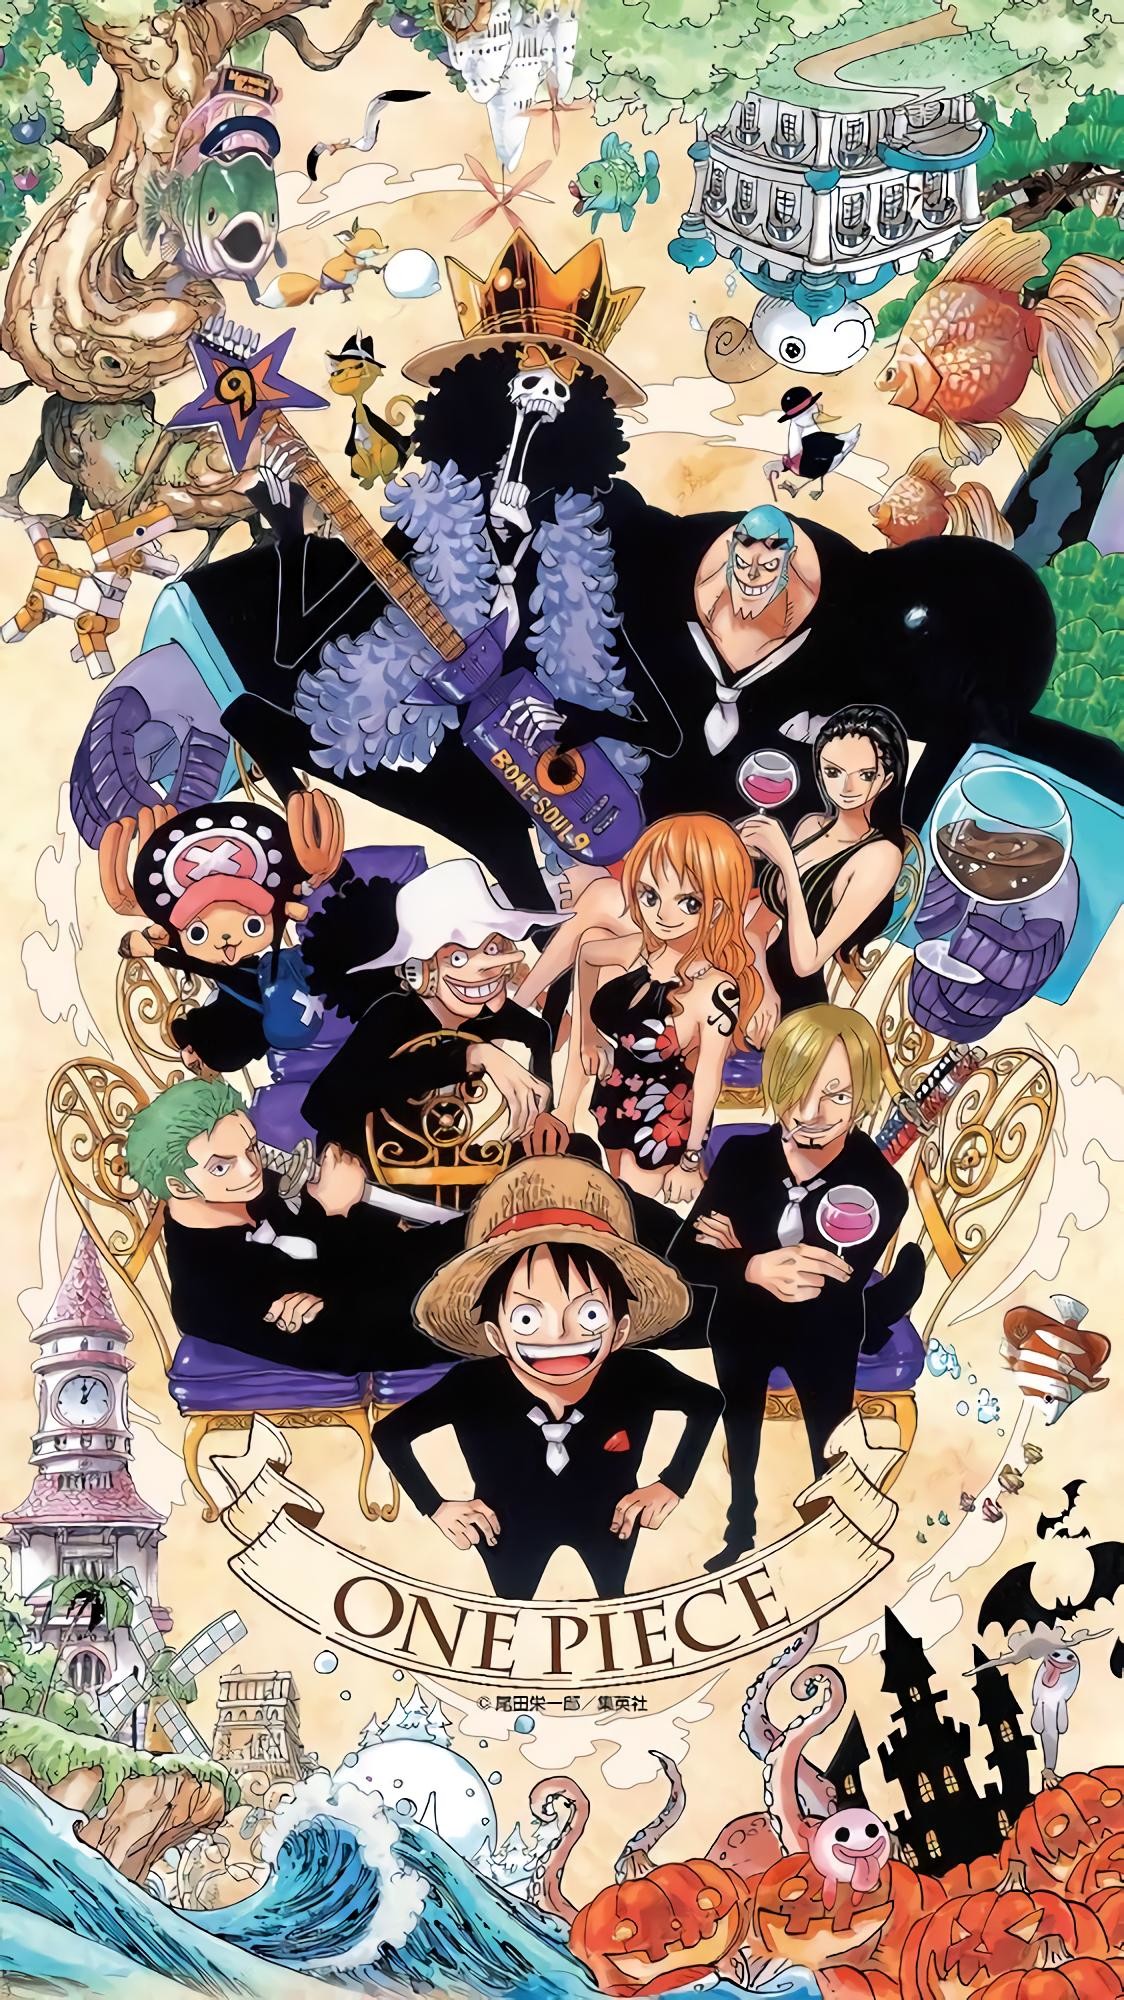 1124x2000 Upscaled One Piece 20th Anniversary Wallpapers...at last! Enjoy!